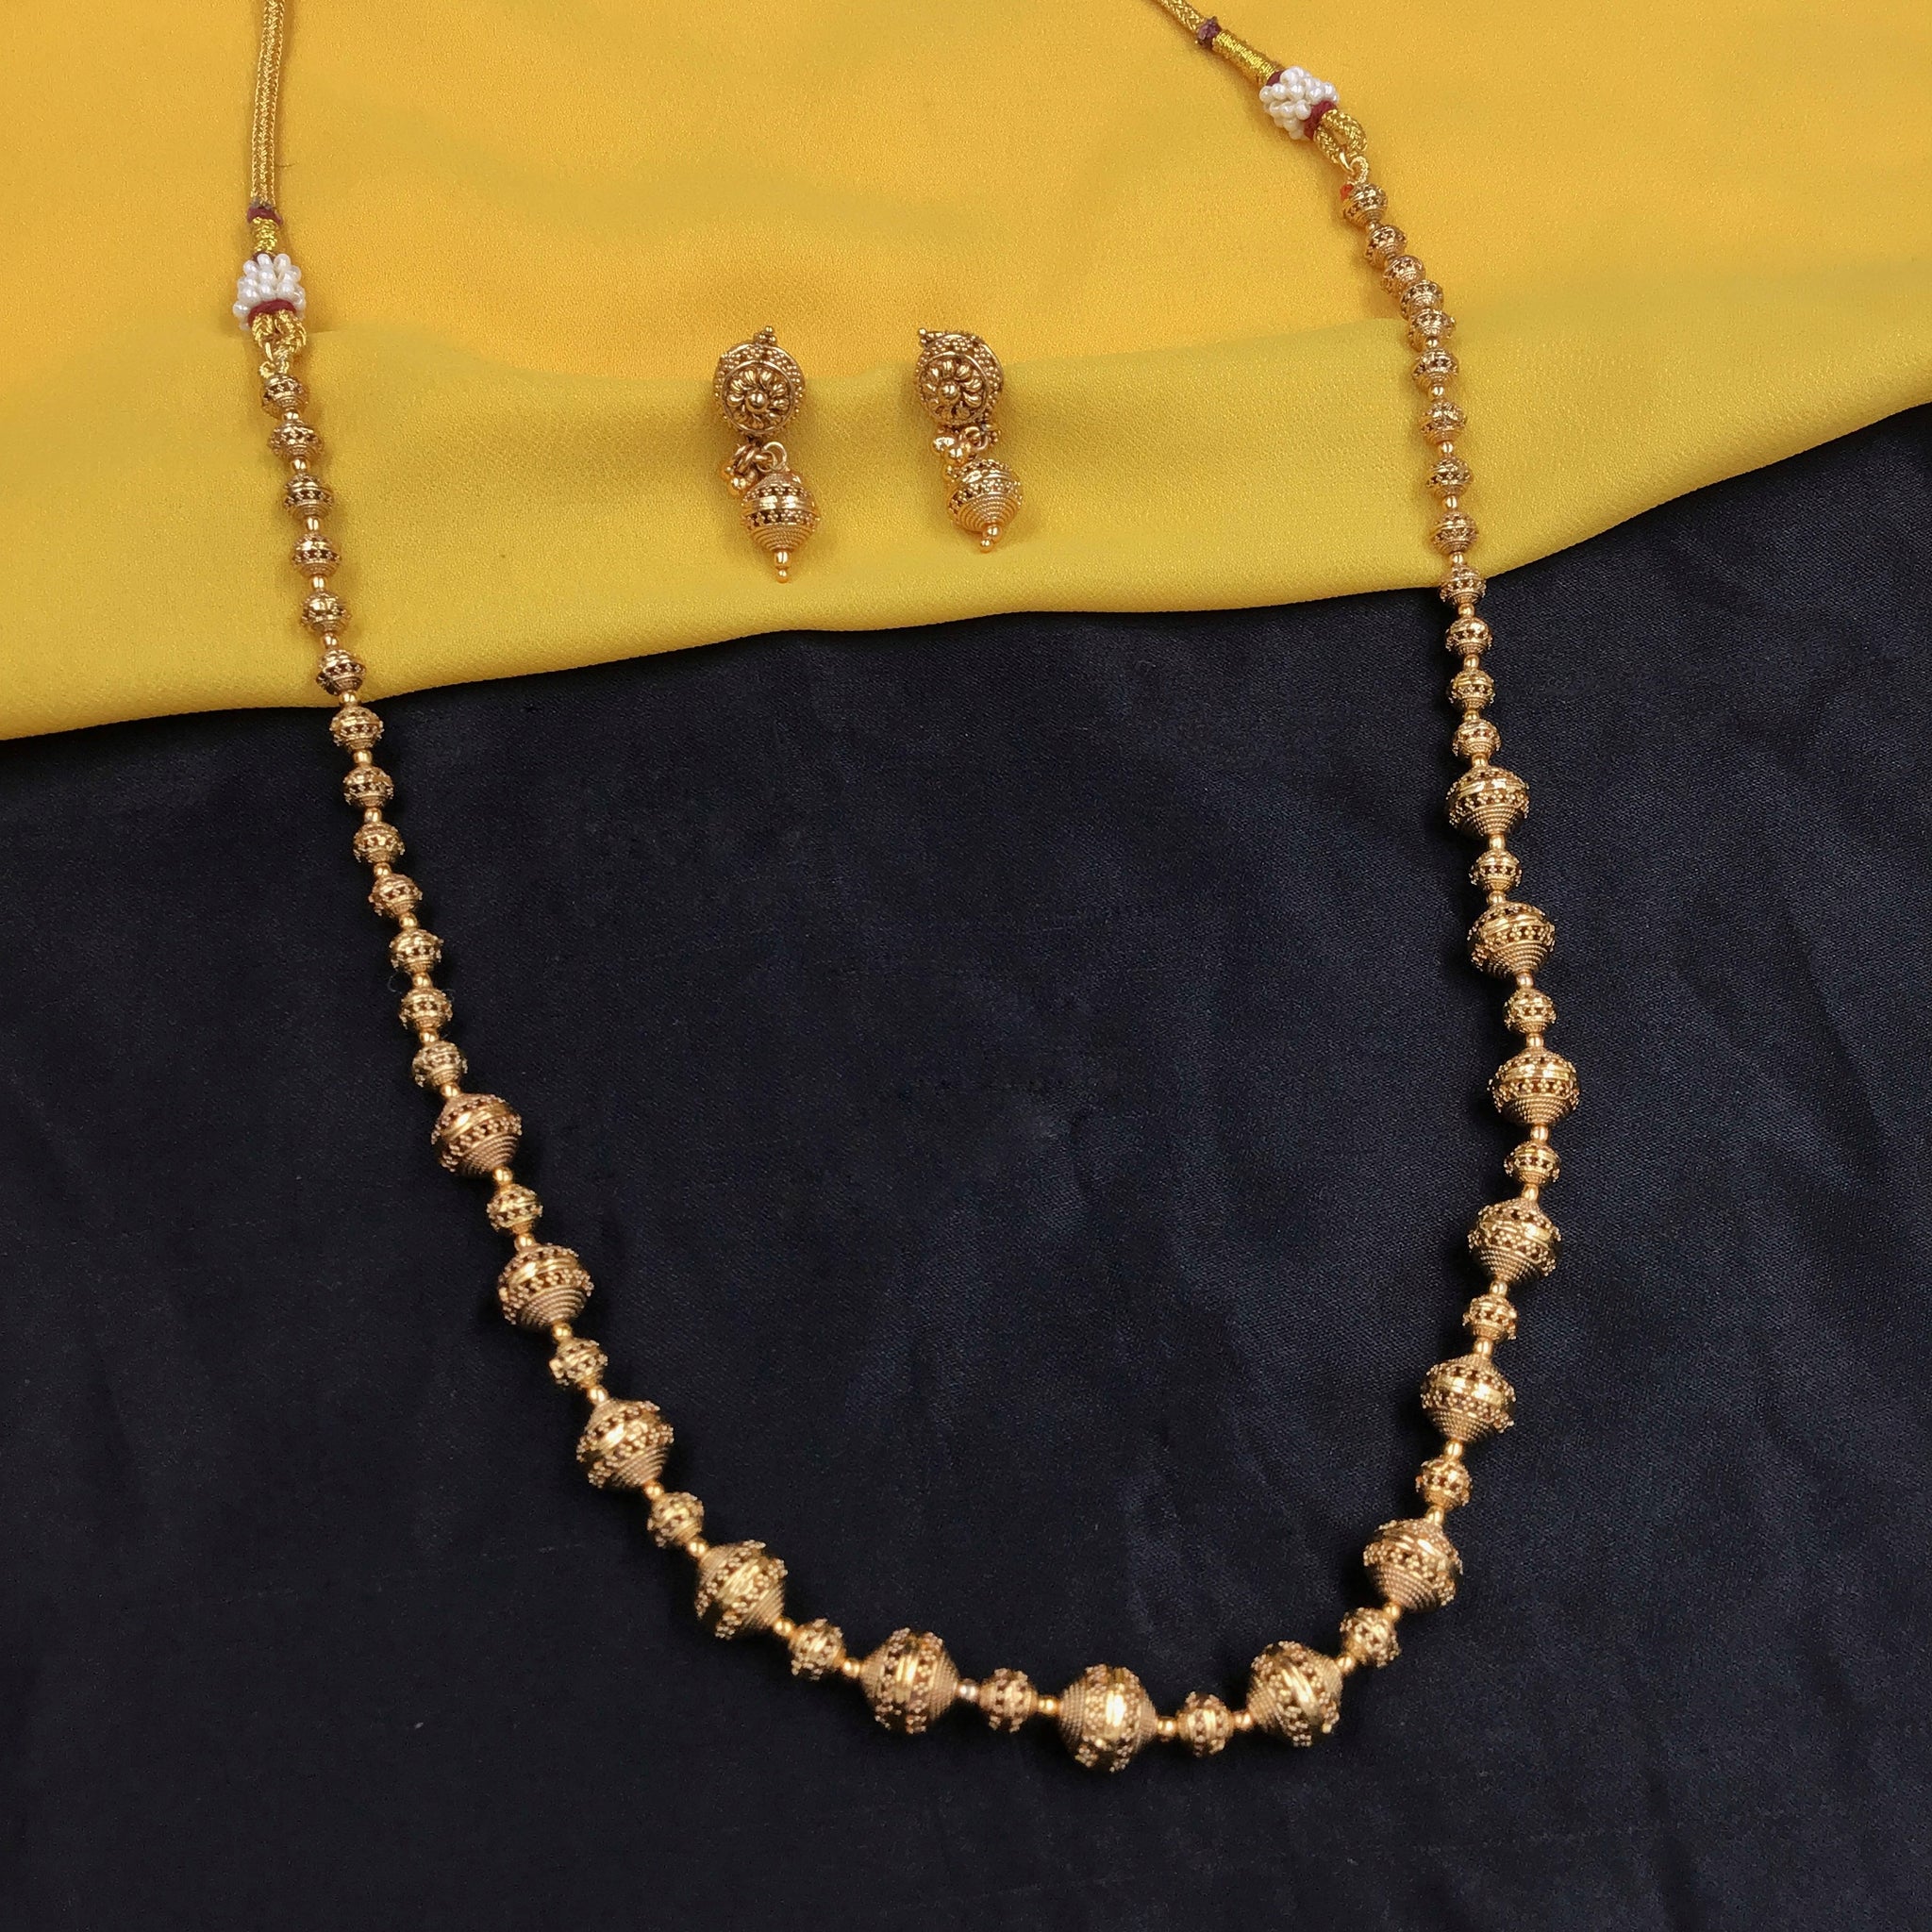 Antique Gold Plated 16 Inch Beads Mala Set 10044-28